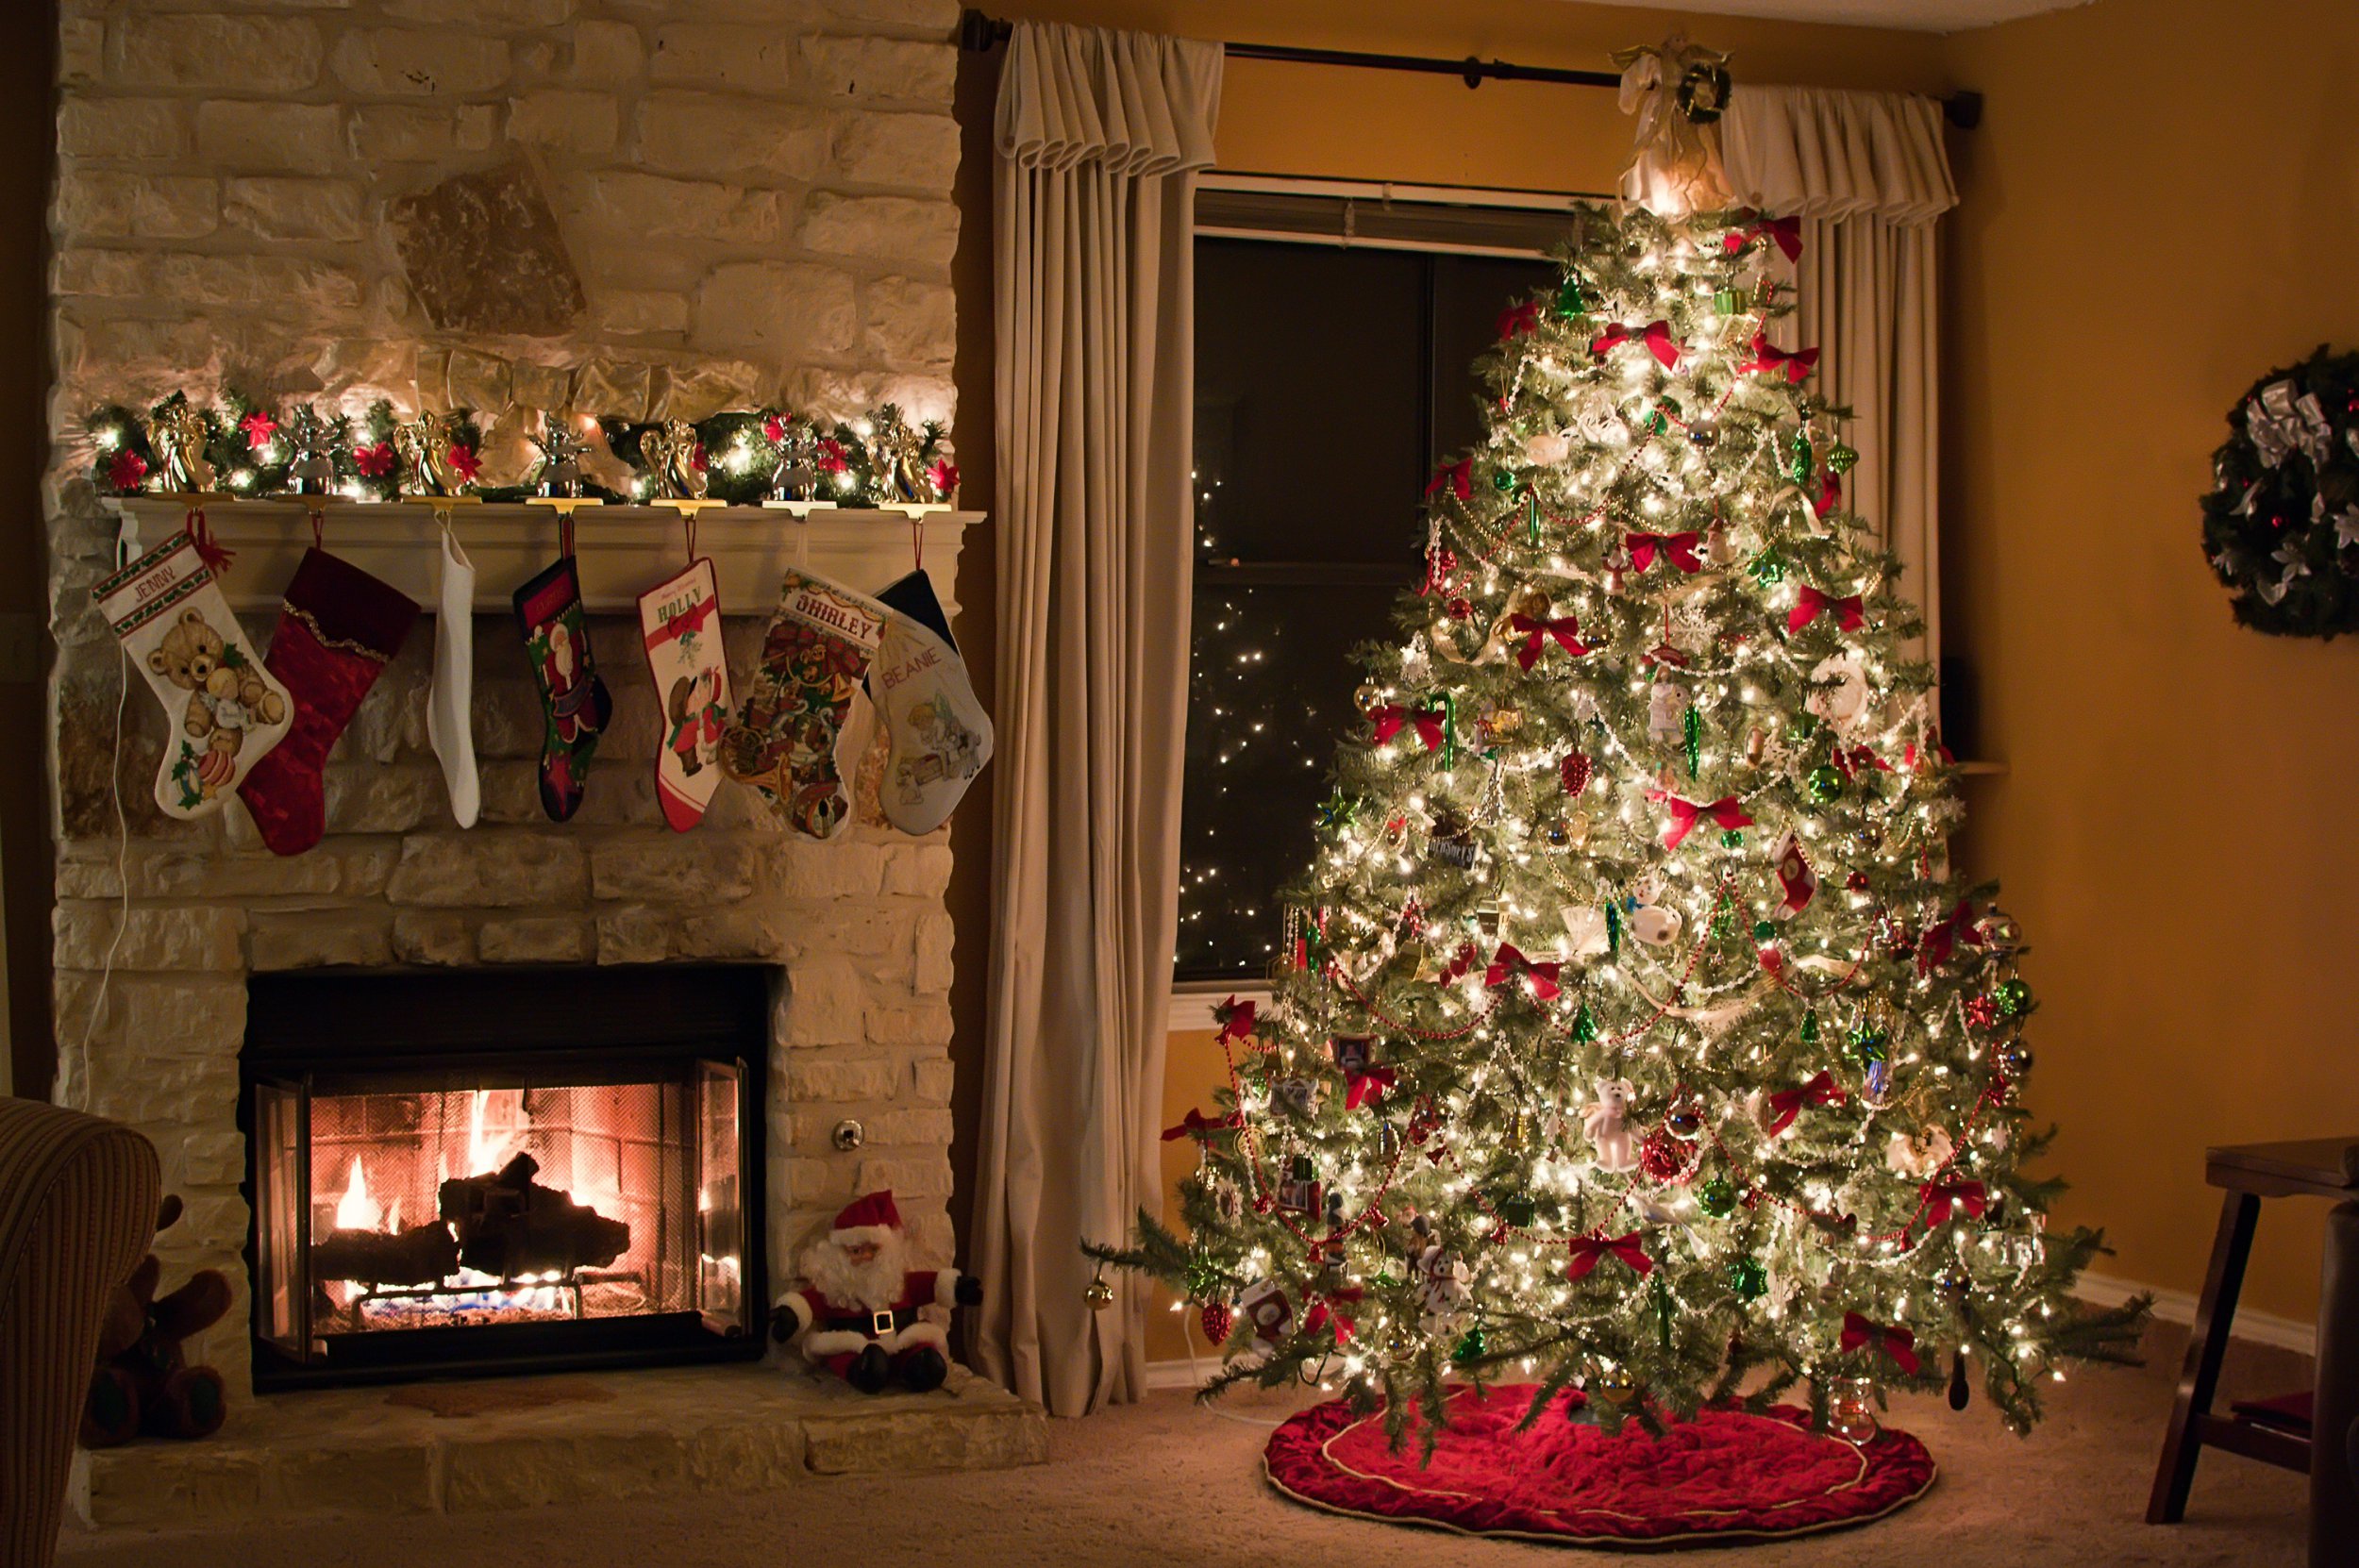 Is it cheaper to buy a real Christmas tree or a fake one?